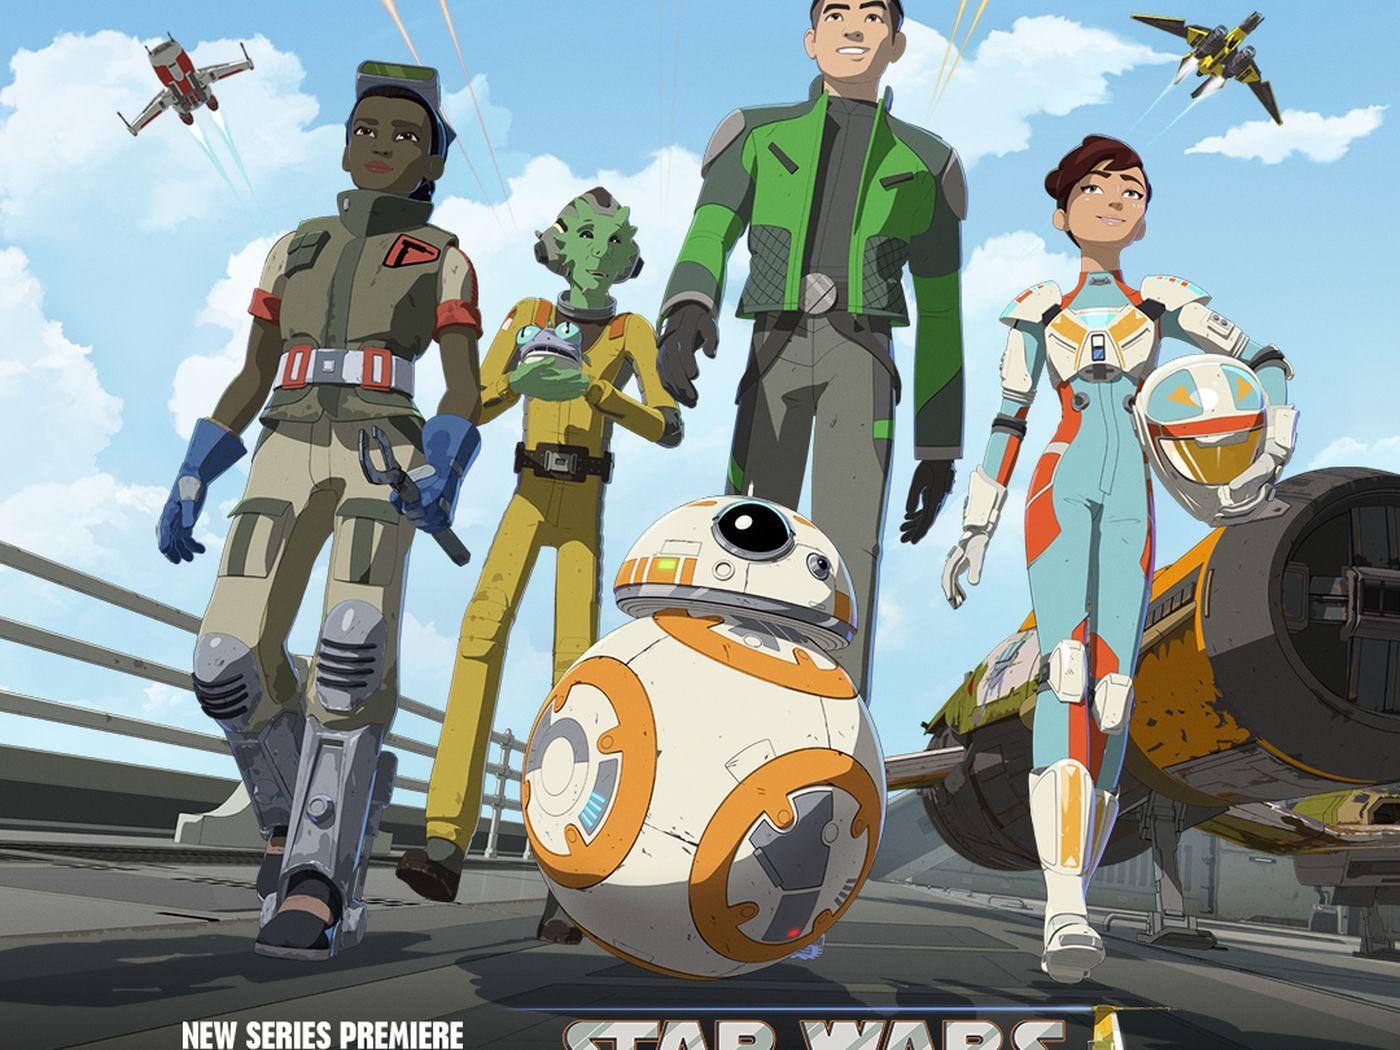 All the updates for Disney's next Star Wars animated show, Star Wars